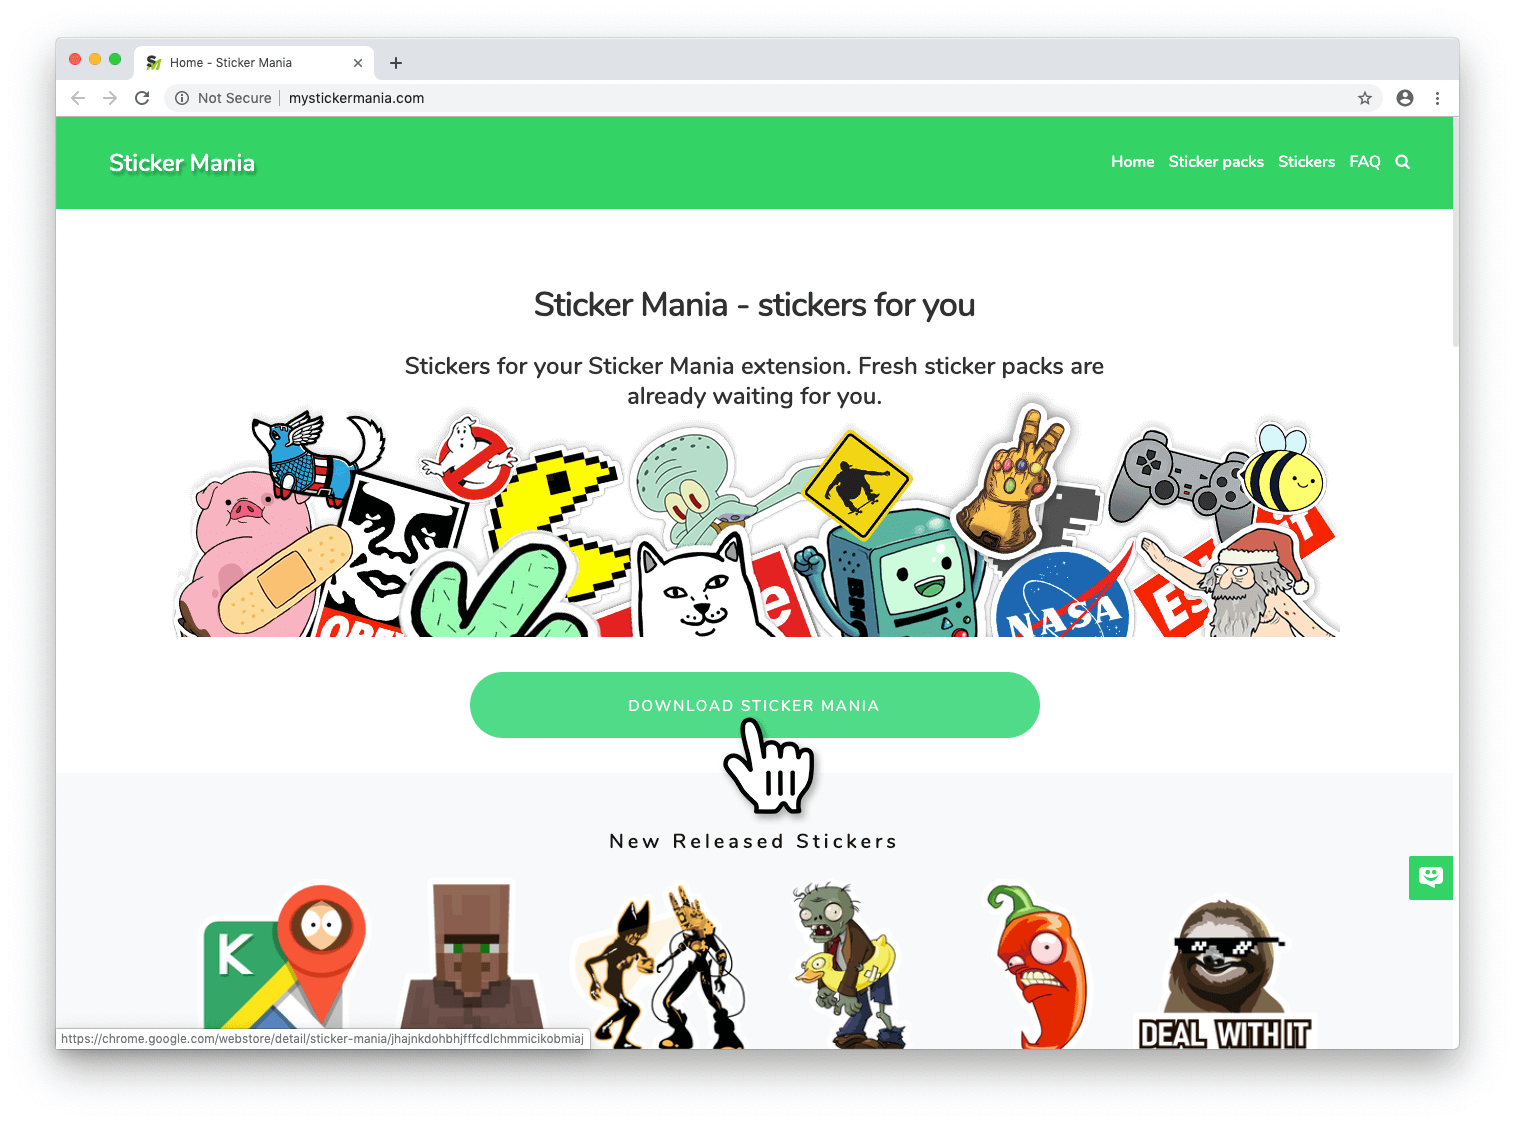 How to install Sticker Mania browser extension?